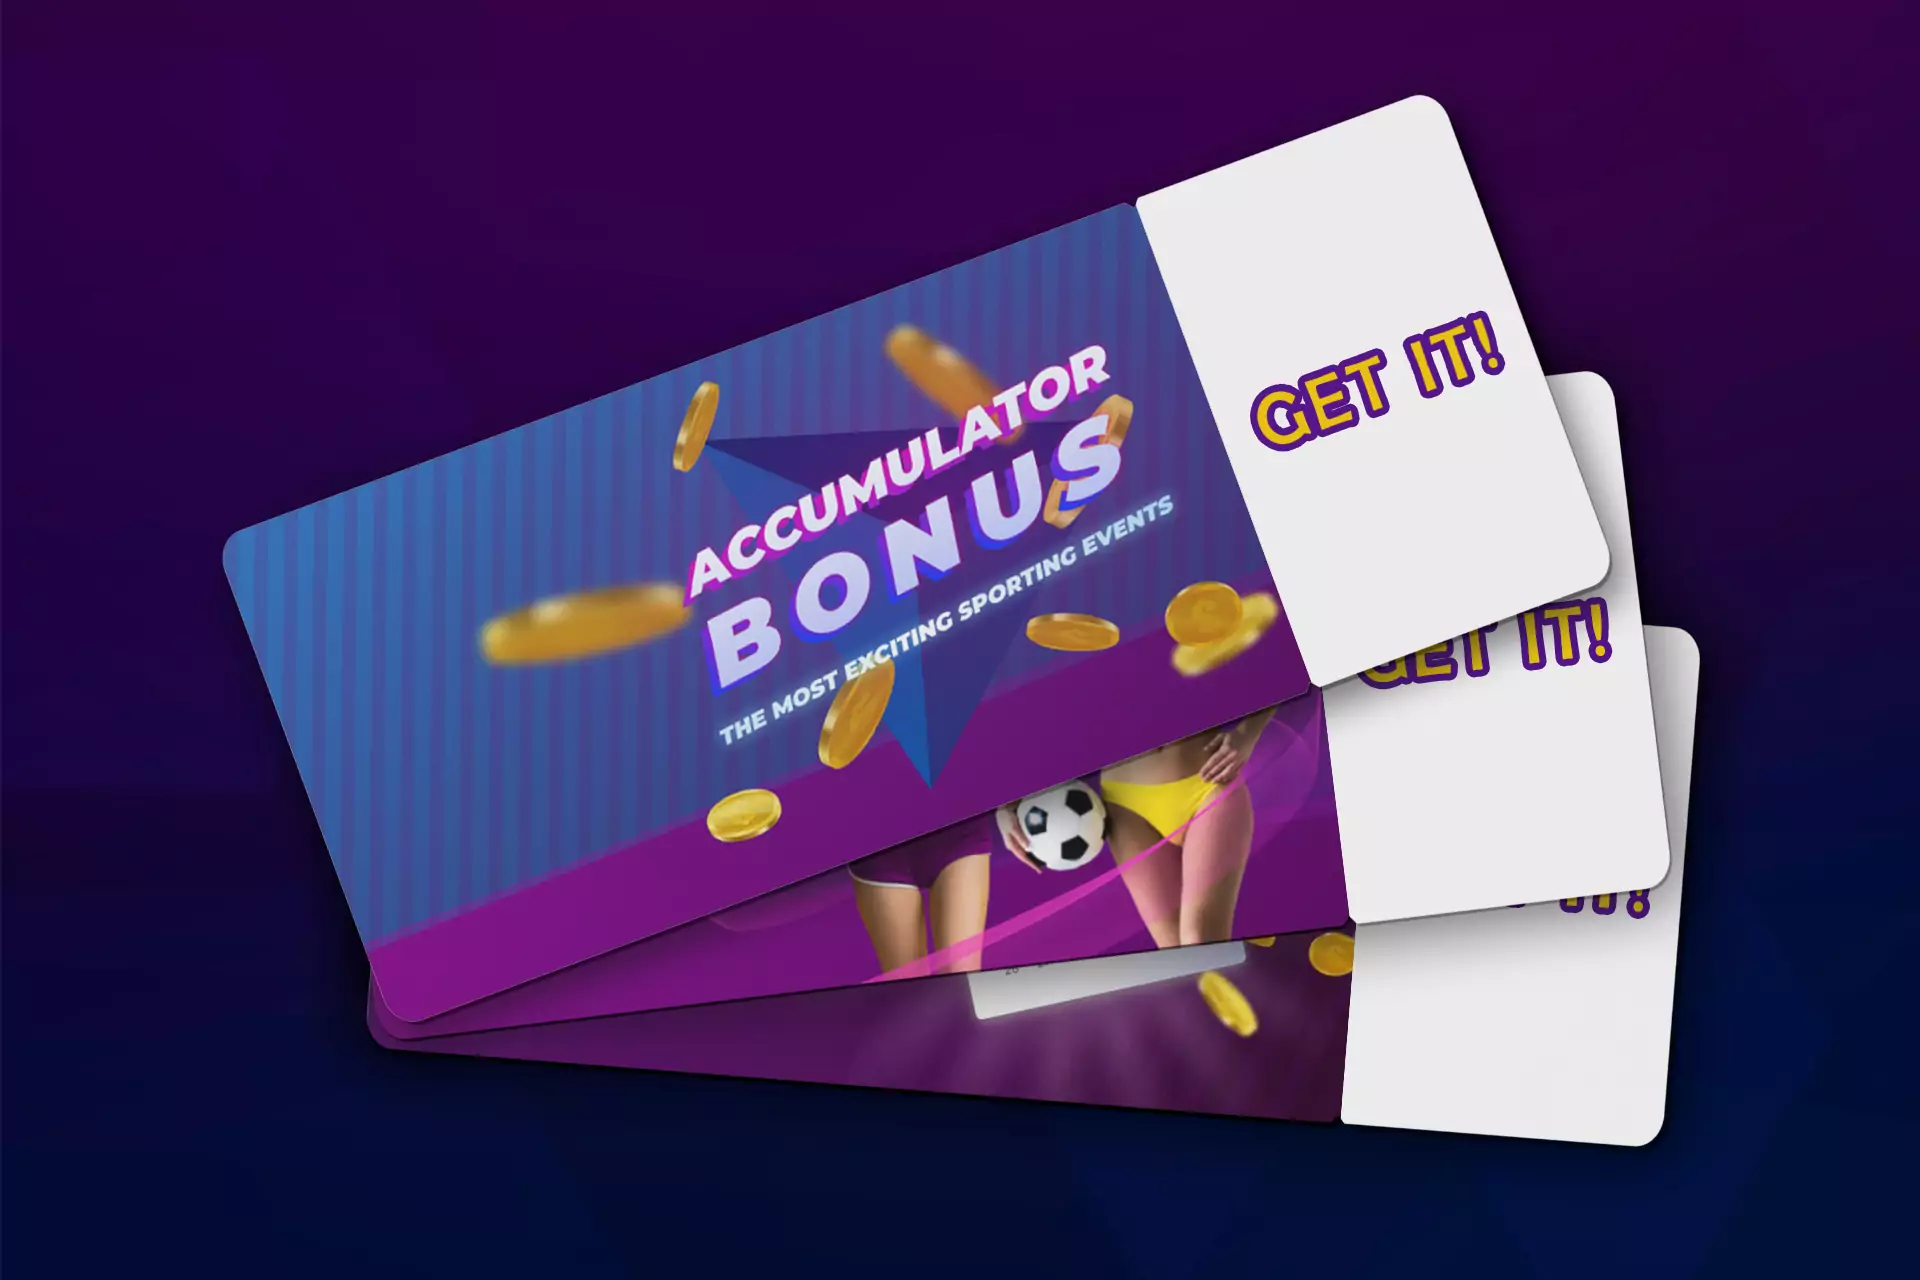 In addition to the welcome bonus and cashback, there are also some other types of bonuses that you can use for betting.